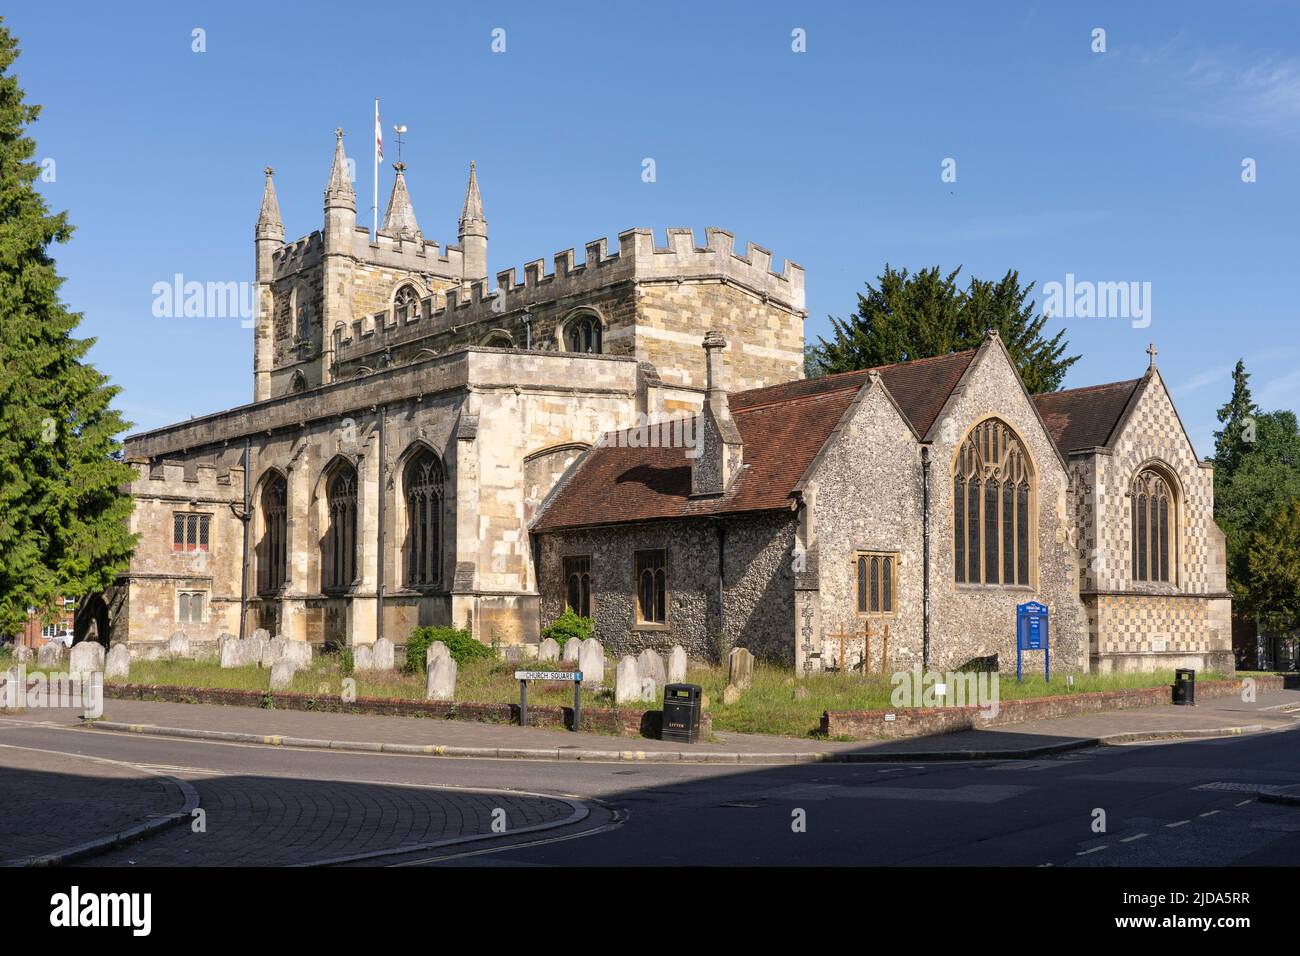 Saint Michael's Church, an anglican parish church built of flint and stone, the oldest church in Basingstoke on a summer's day. Hampshire, UK Stock Photo